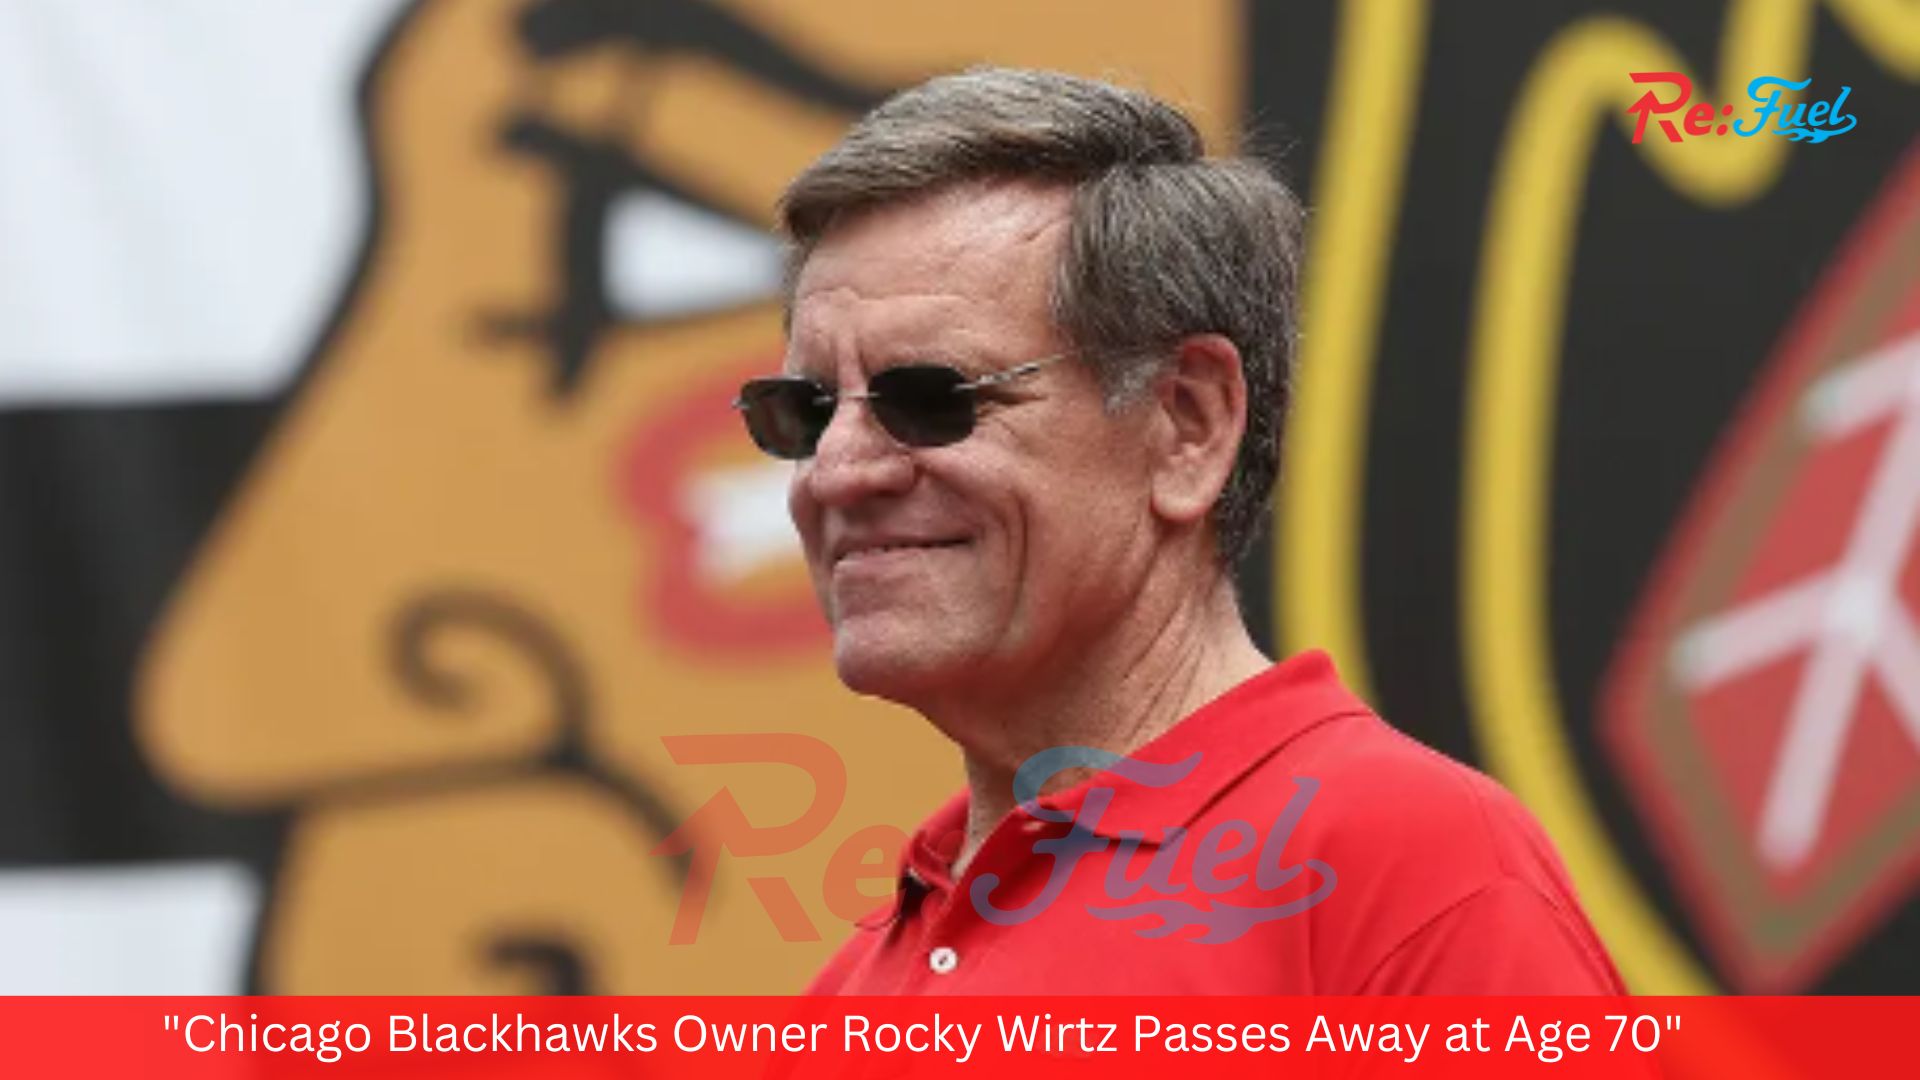 "Chicago Blackhawks Owner Rocky Wirtz Passes Away at Age 70"